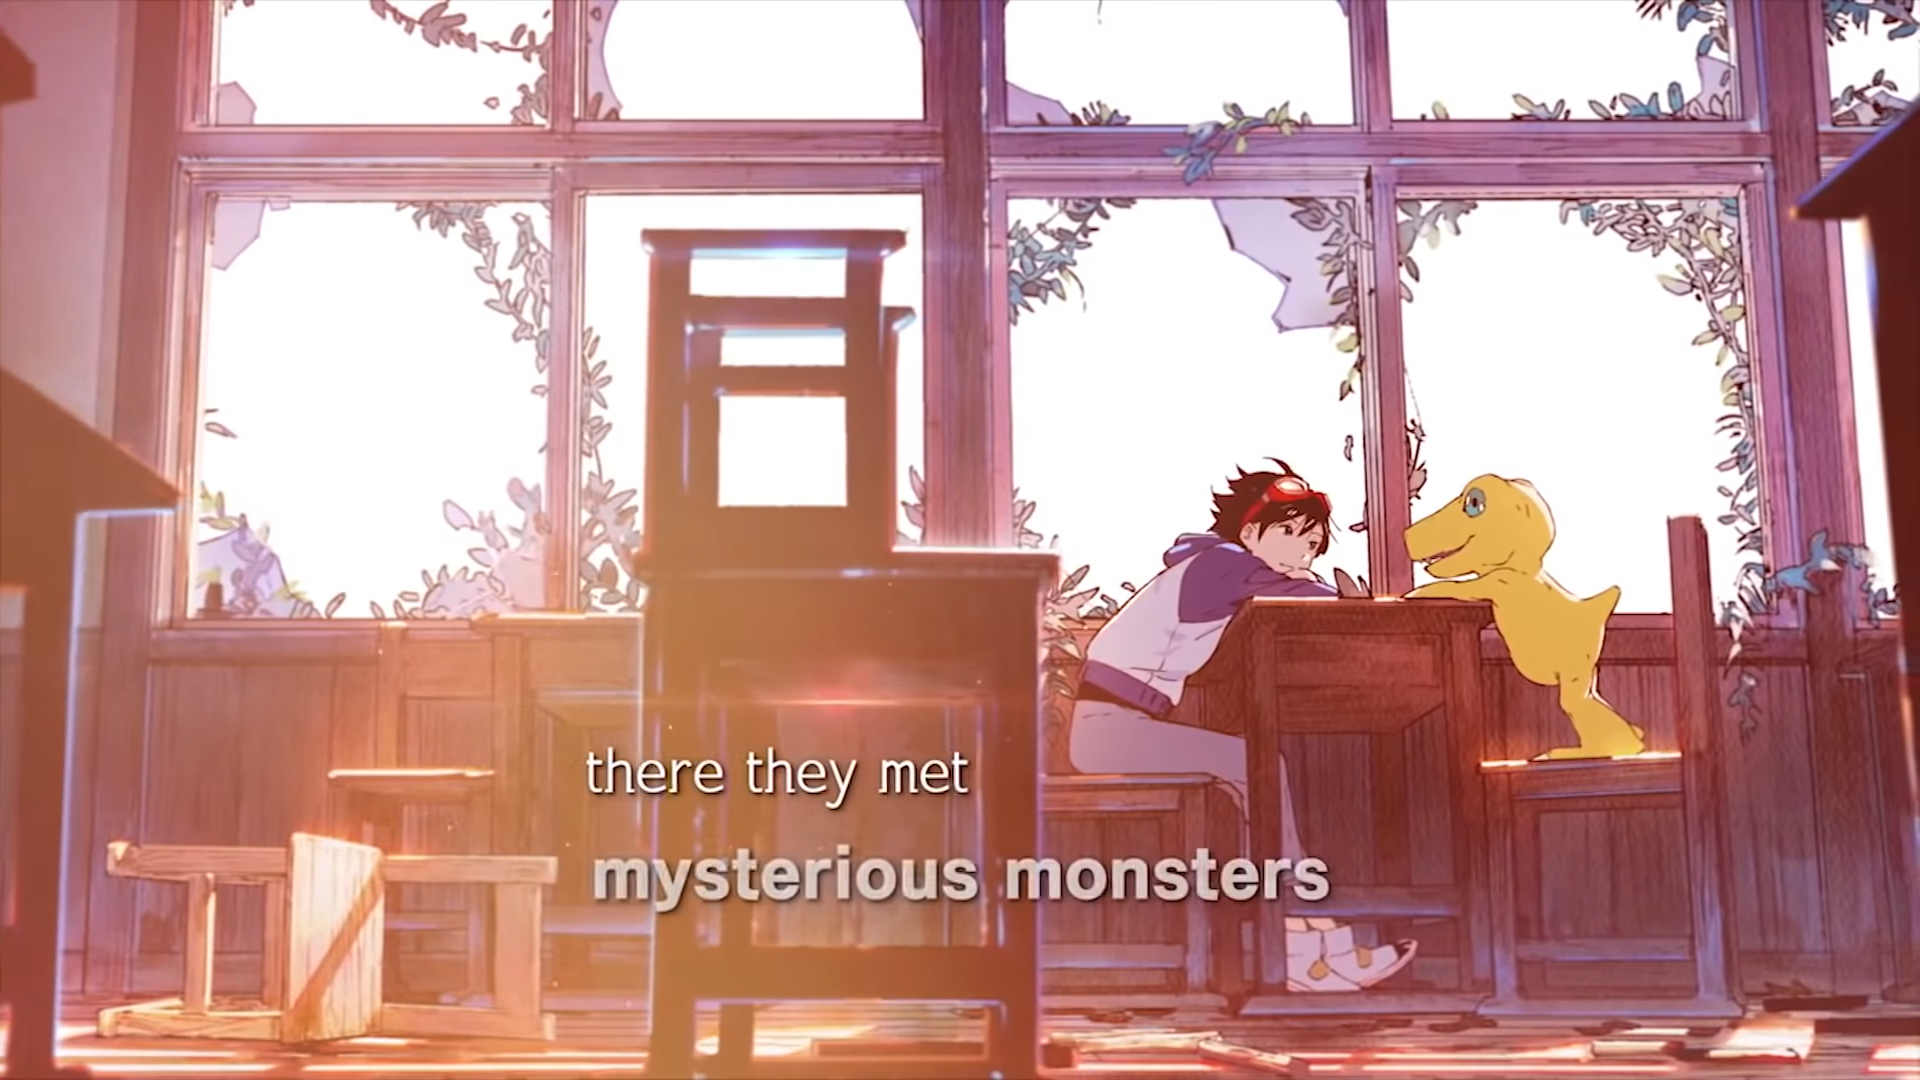 The Mattress — Digimon Survive: All Endings Ranked